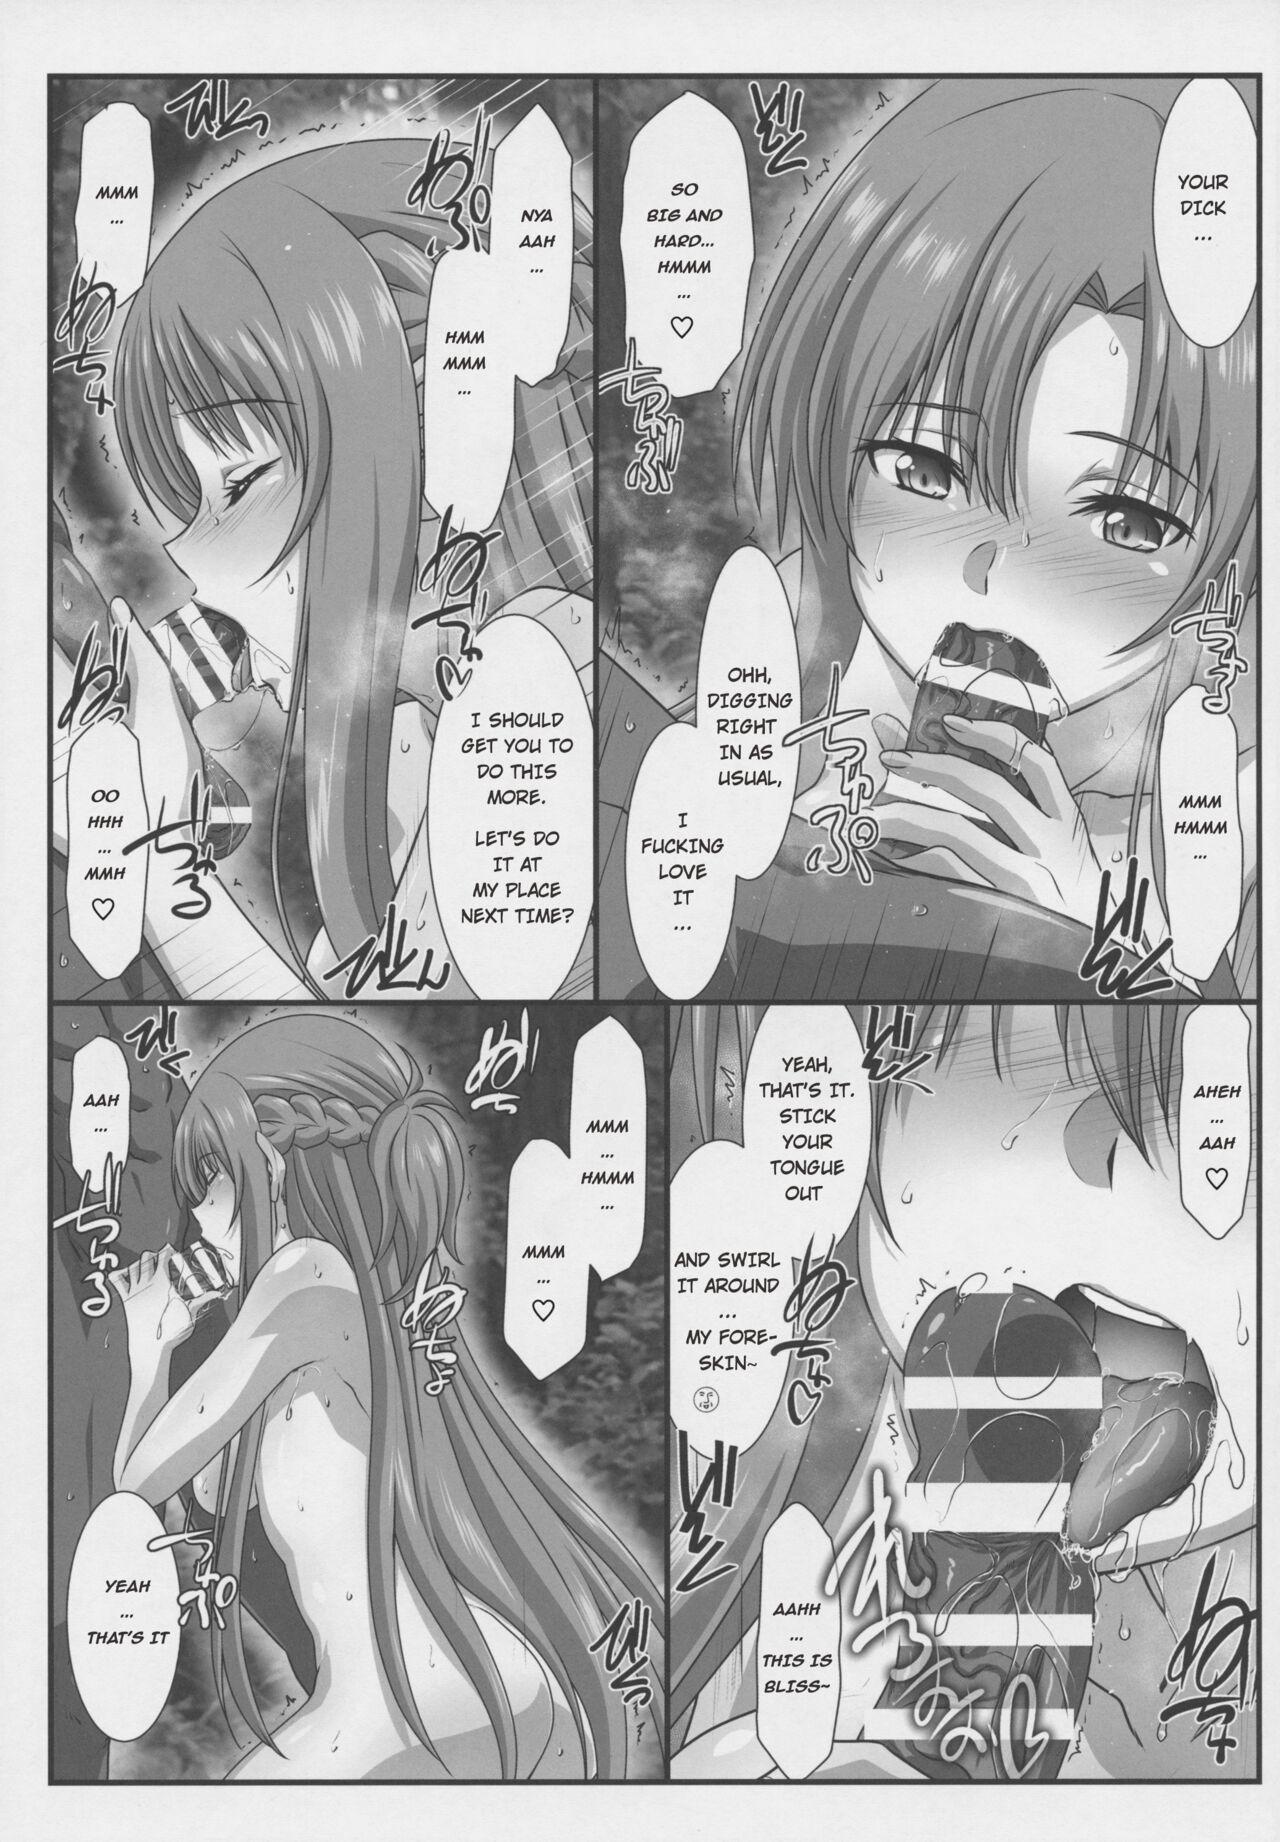 Gaystraight Astral Bout Ver. 45 - Sword art online Pau - Page 6